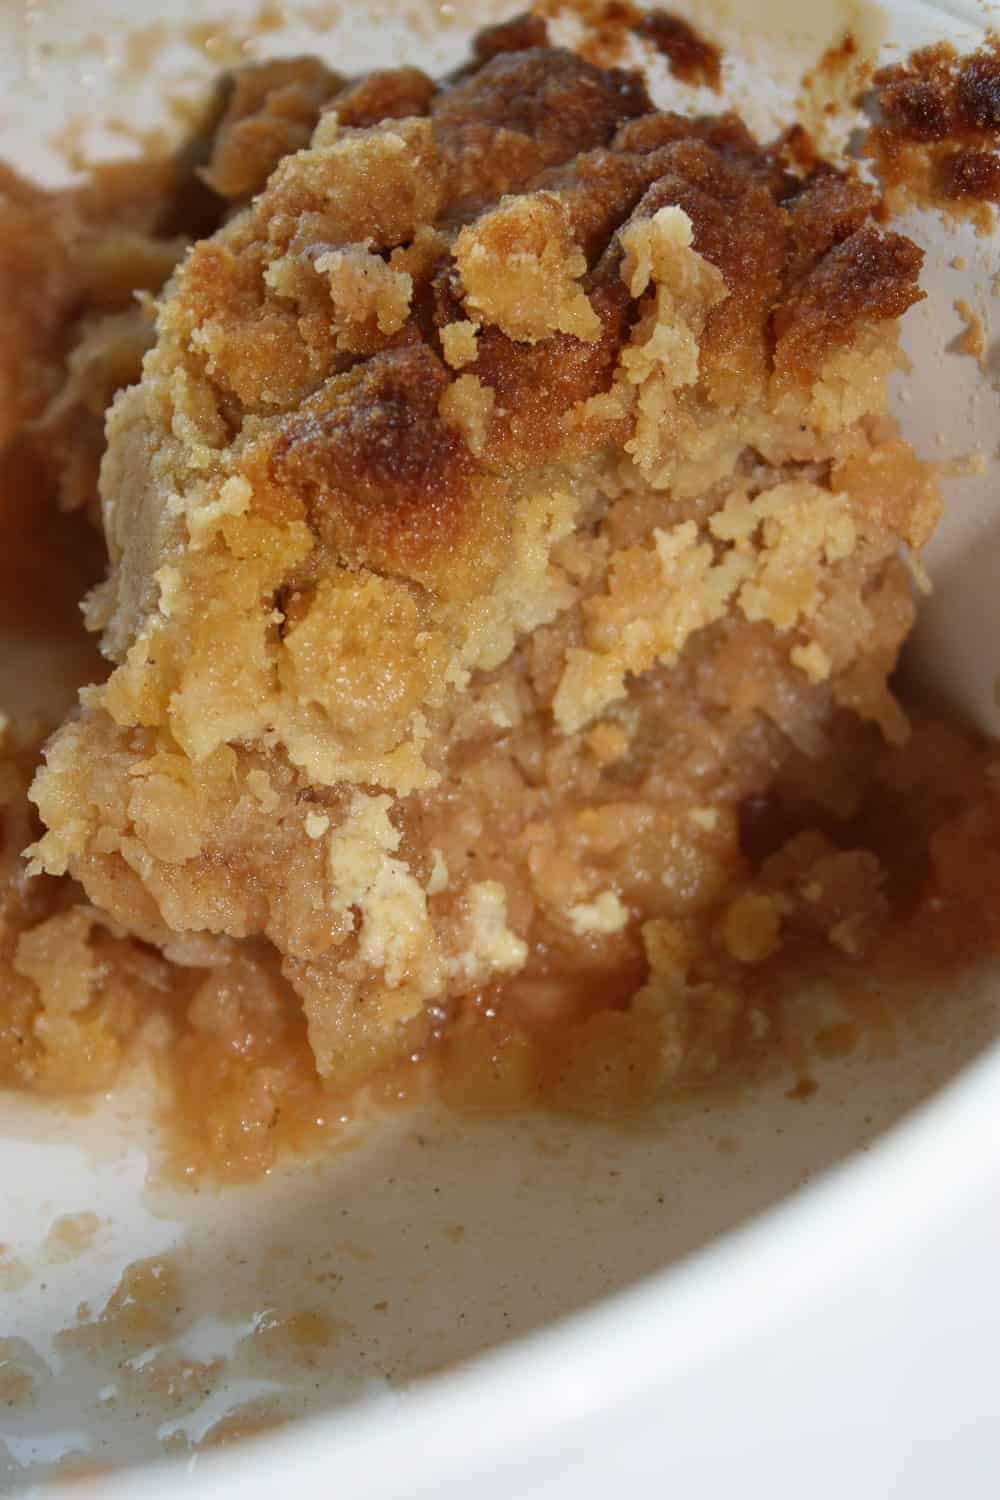 The perfect way to get everyone at your holiday feast to enjoy turnip, including the little ones, is to prepare and serve this Turnip Apple Crisp.